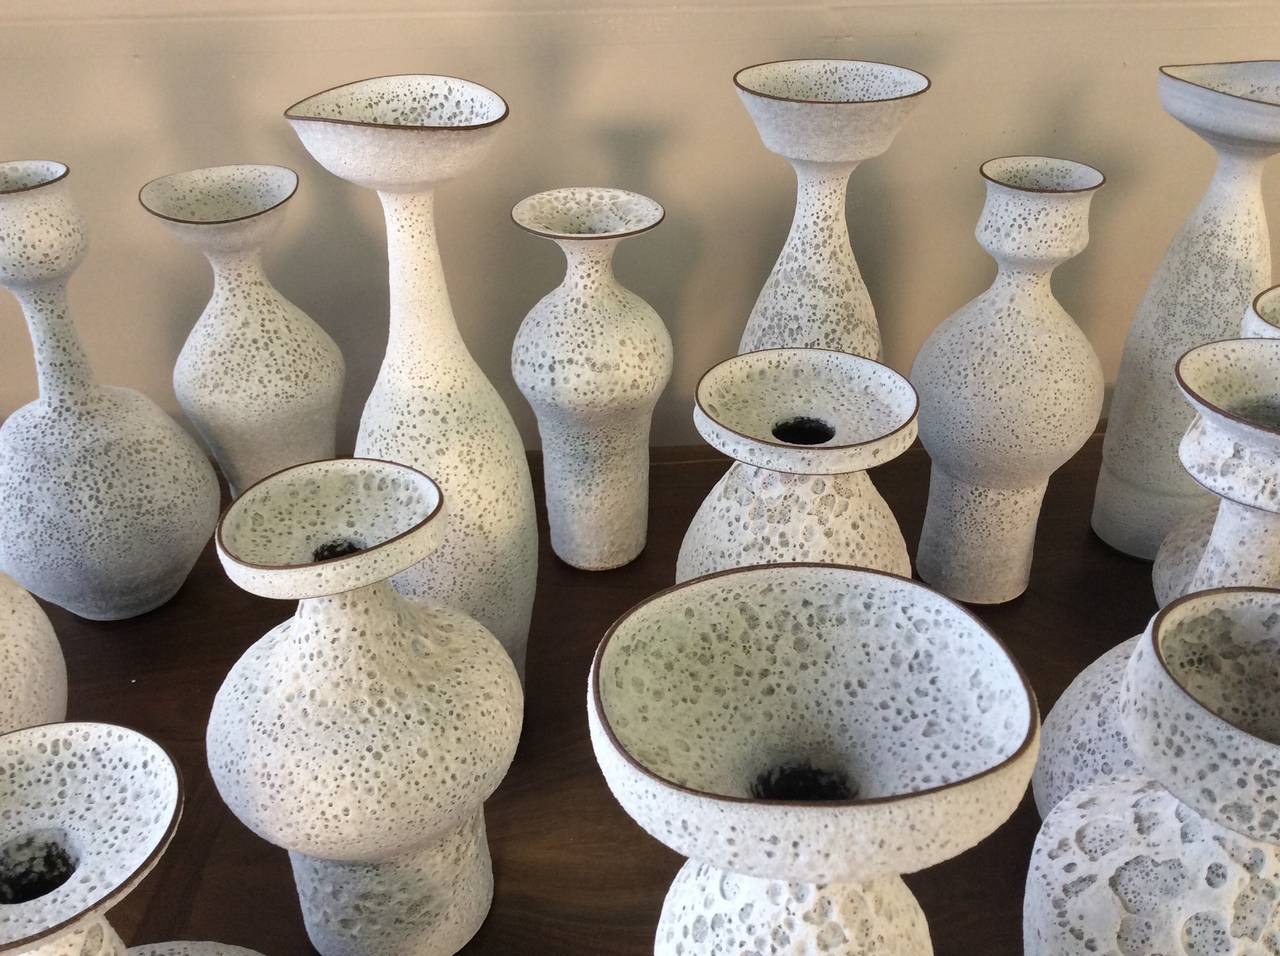 American Masterful Studio Pottery Vases in a White Crater Glaze by Jeremy Briddell, 2015